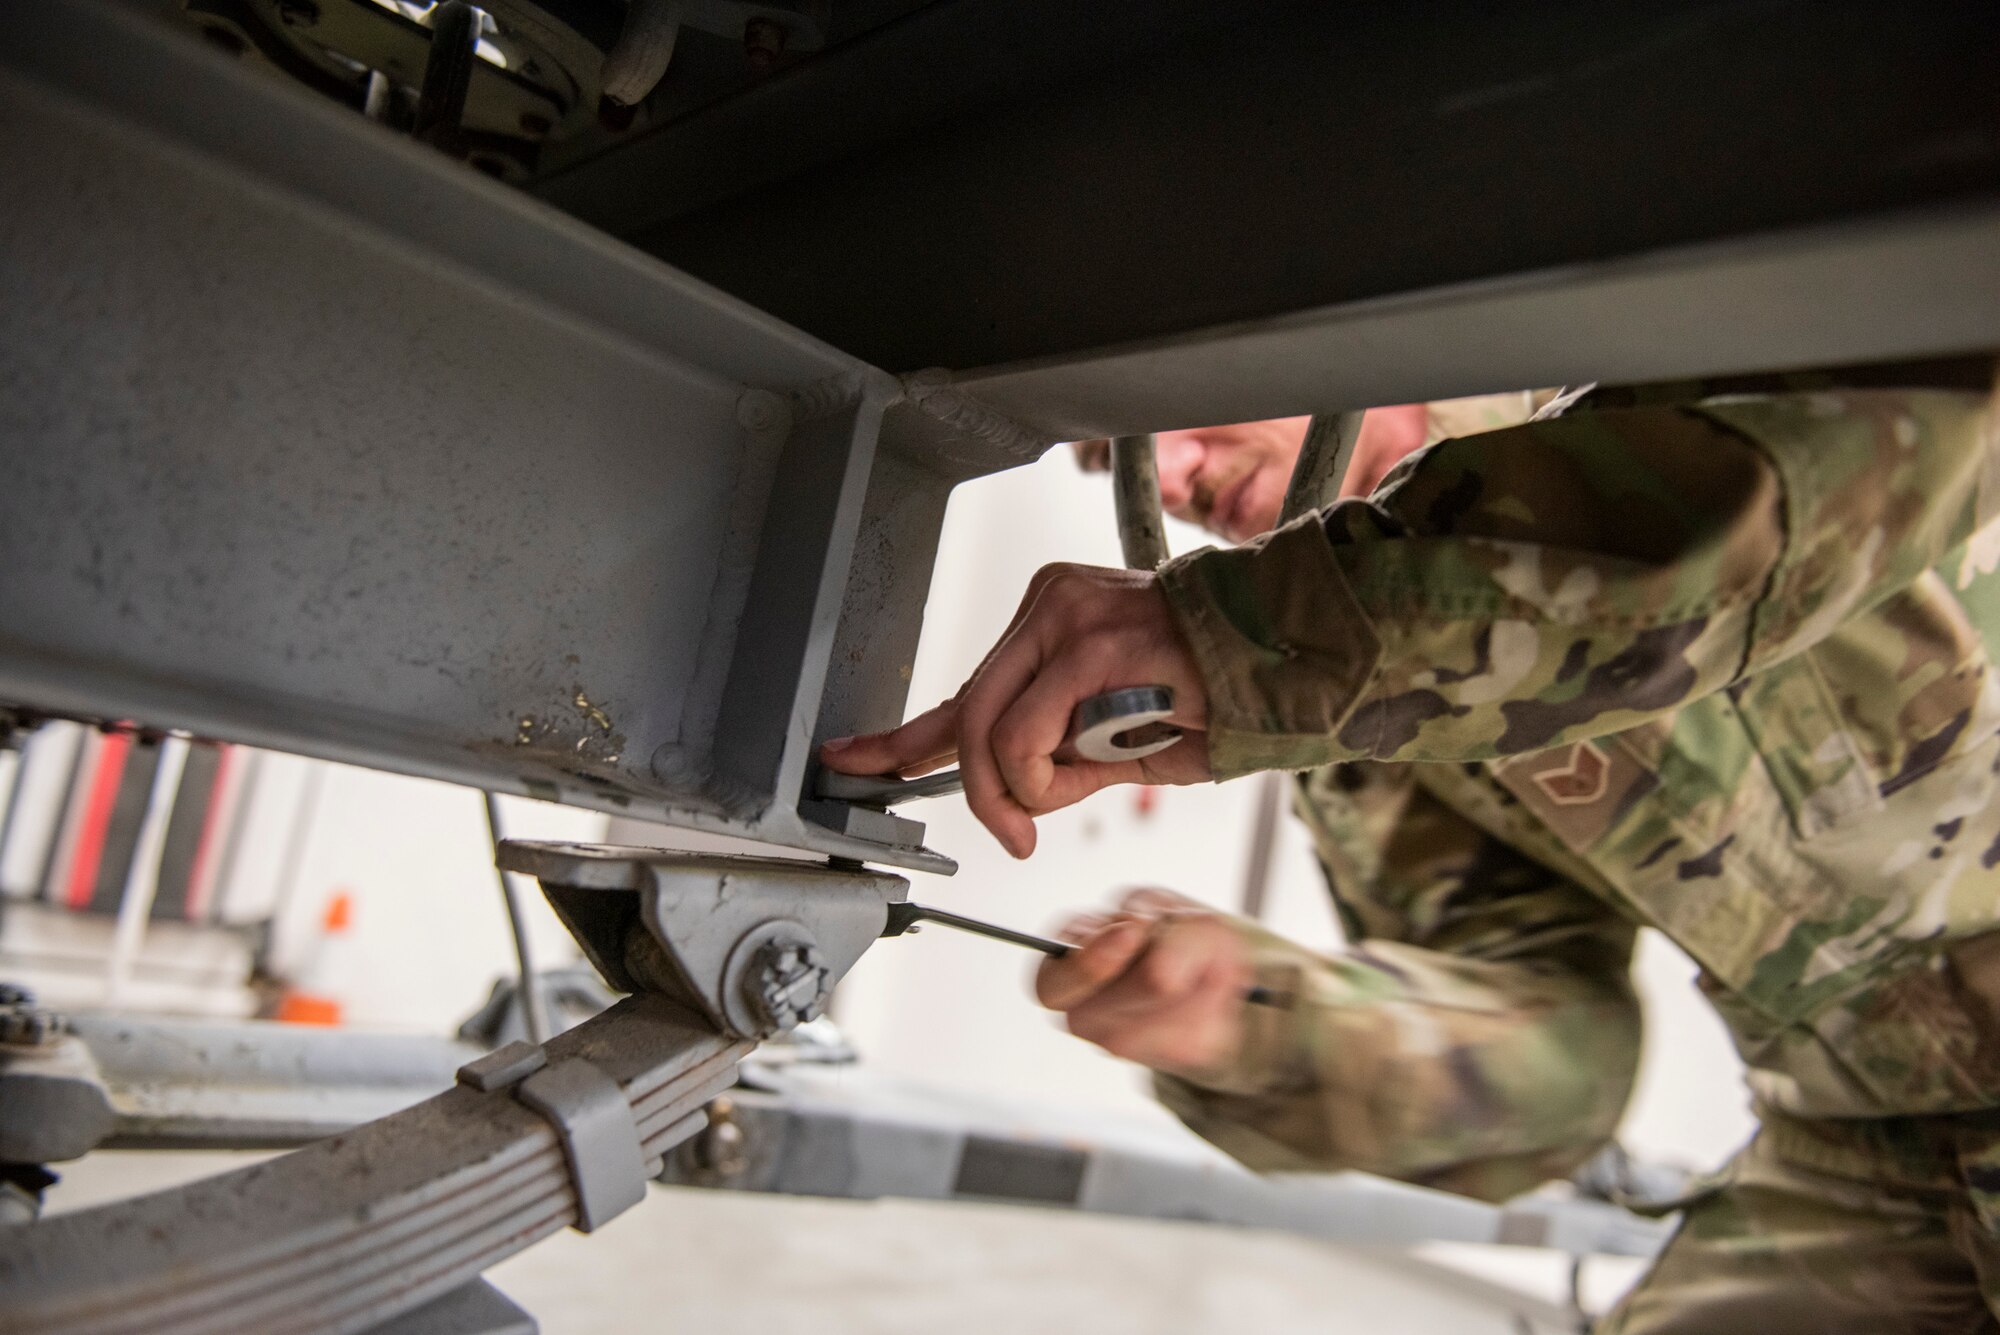 Staff Sgt. Nathan Deaton, 23d Maintenance Squadron Maintenance crew chief, services munitions equipment Oct. 17, 2019, at Moody Air Force Base, Ga. The Munitions Flight Production Division is responsible for maintaining, inspecting, producing and delivering ammo to Moody’s munitions holding area. Following technical orders for operations and procedures allow the Airmen to minimize errors in their stock of over 52 million munitions, ensuring the fighter squadrons are prepared for future operations. (U.S. Air Force photo by Airman Elijah M. Dority)